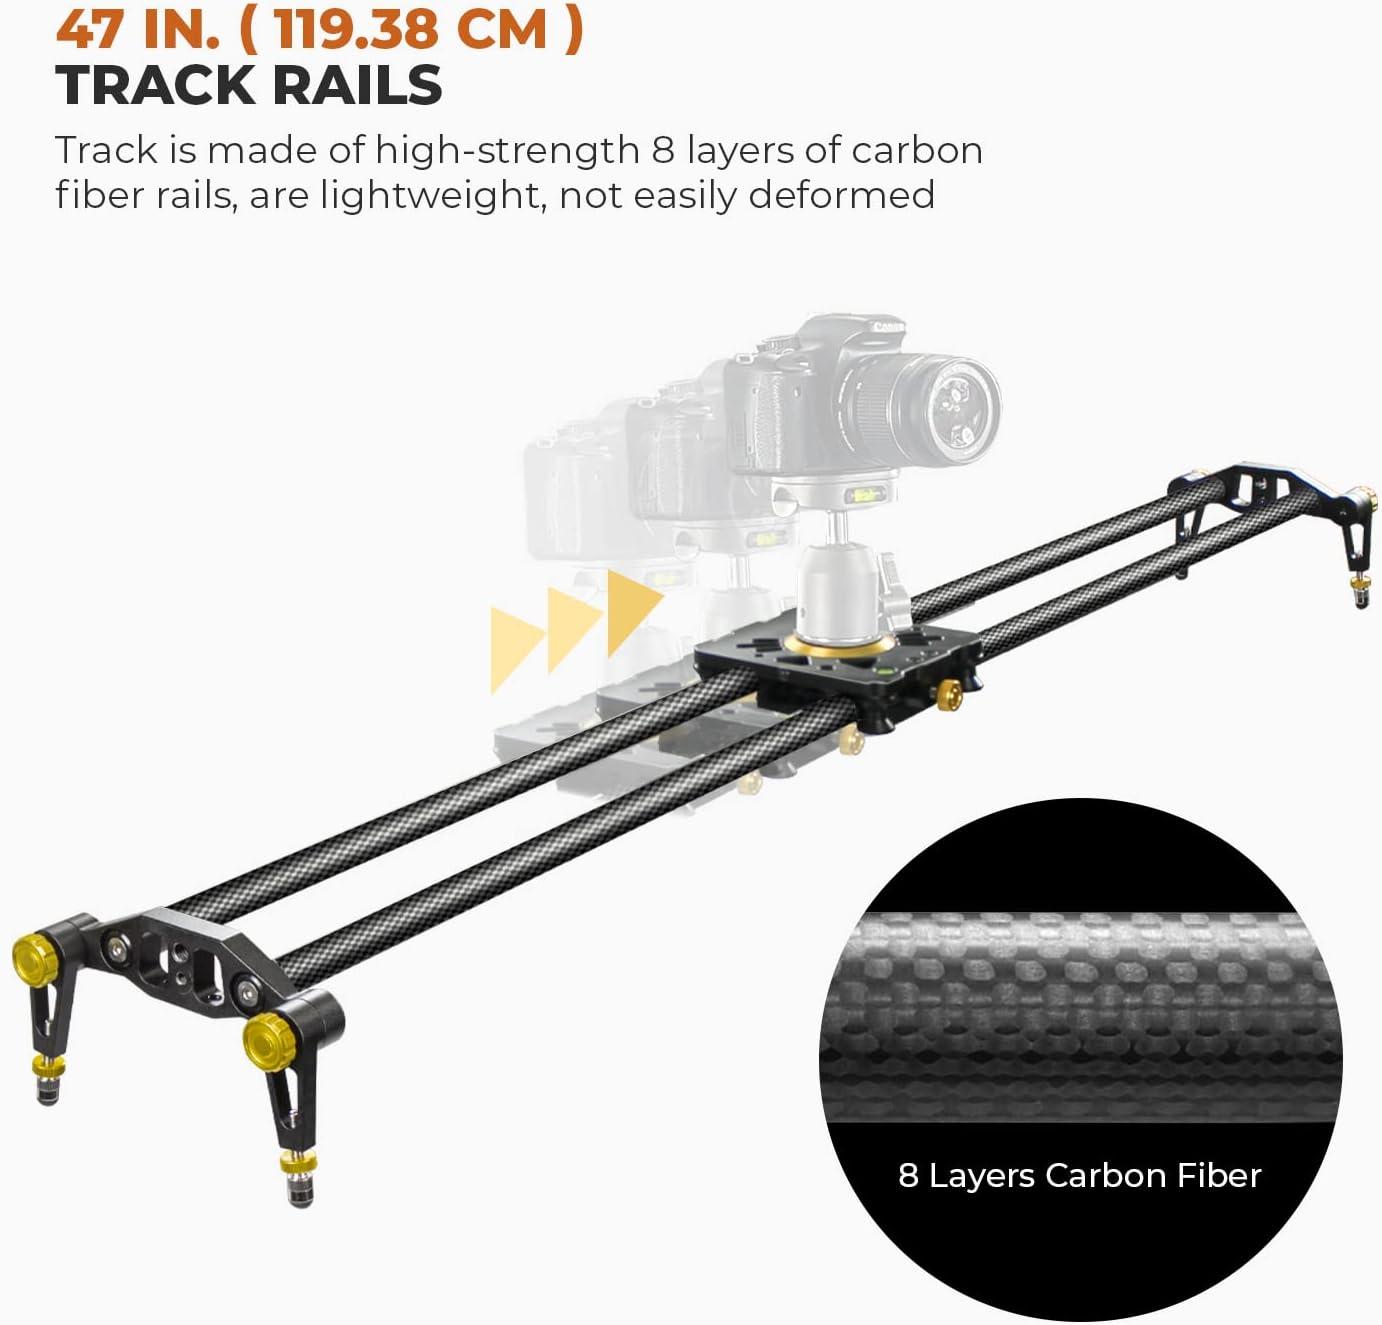 LimoStudio 47-inch DSLR Camera Slider Dolly Track, Video Stabilizer, Carbon  Fiber Rail System, High Precision Smooth Bearing Slide with Standard Mount  and Spirit Level, Photo Studio, AGG1982 47 in.